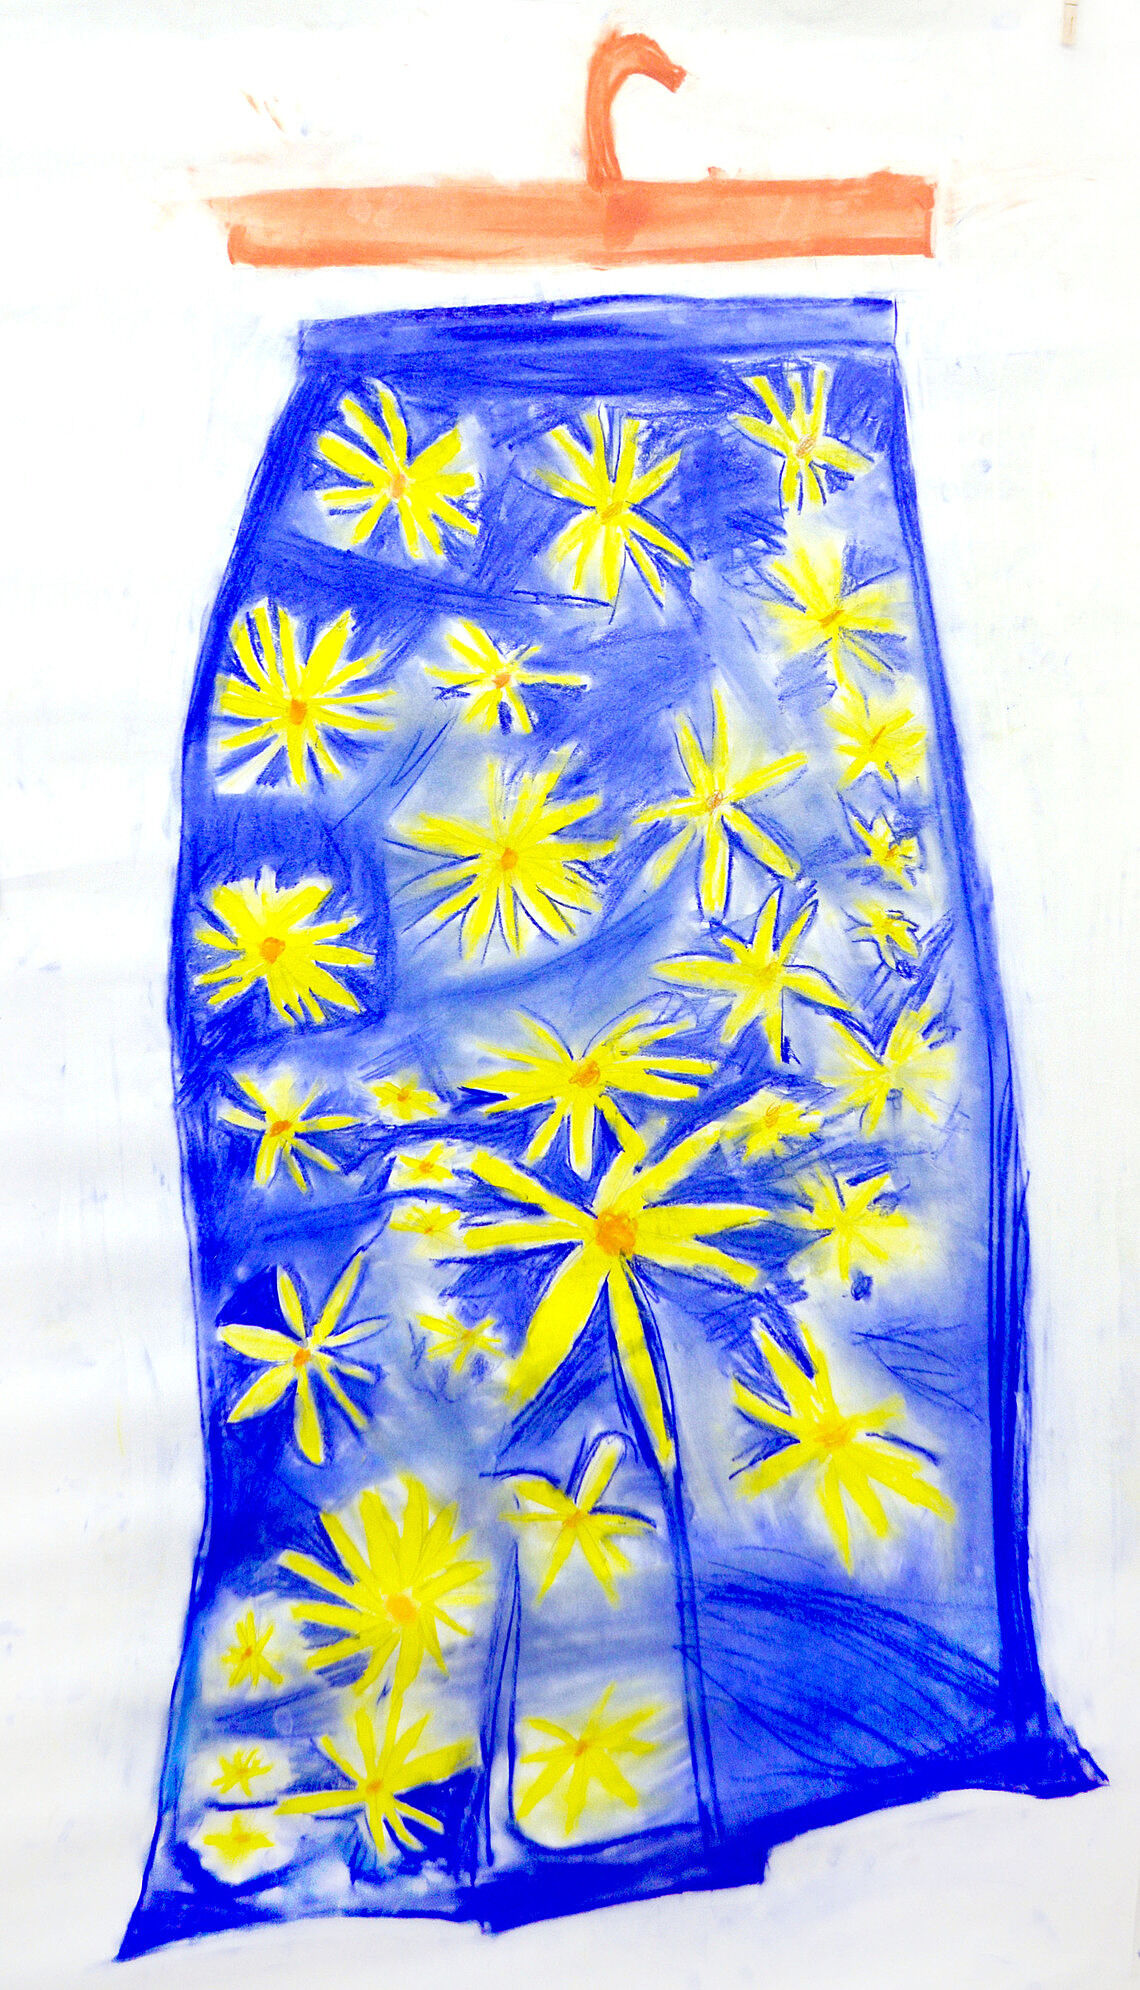 A drawing of a blue skirt with yellow flowers on it.